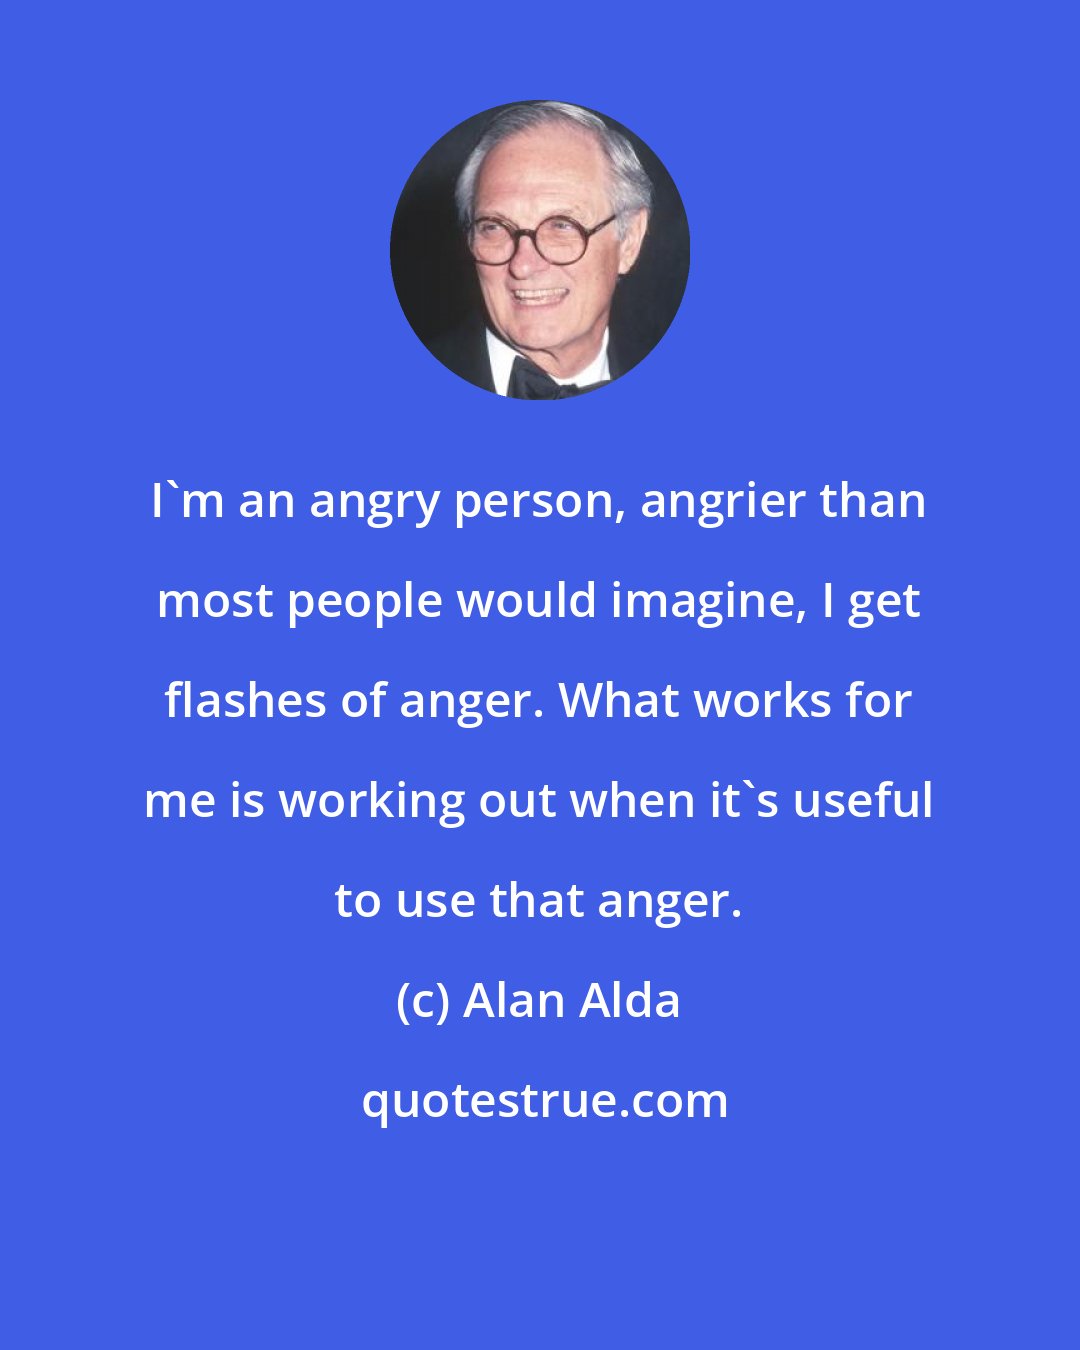 Alan Alda: I'm an angry person, angrier than most people would imagine, I get flashes of anger. What works for me is working out when it's useful to use that anger.